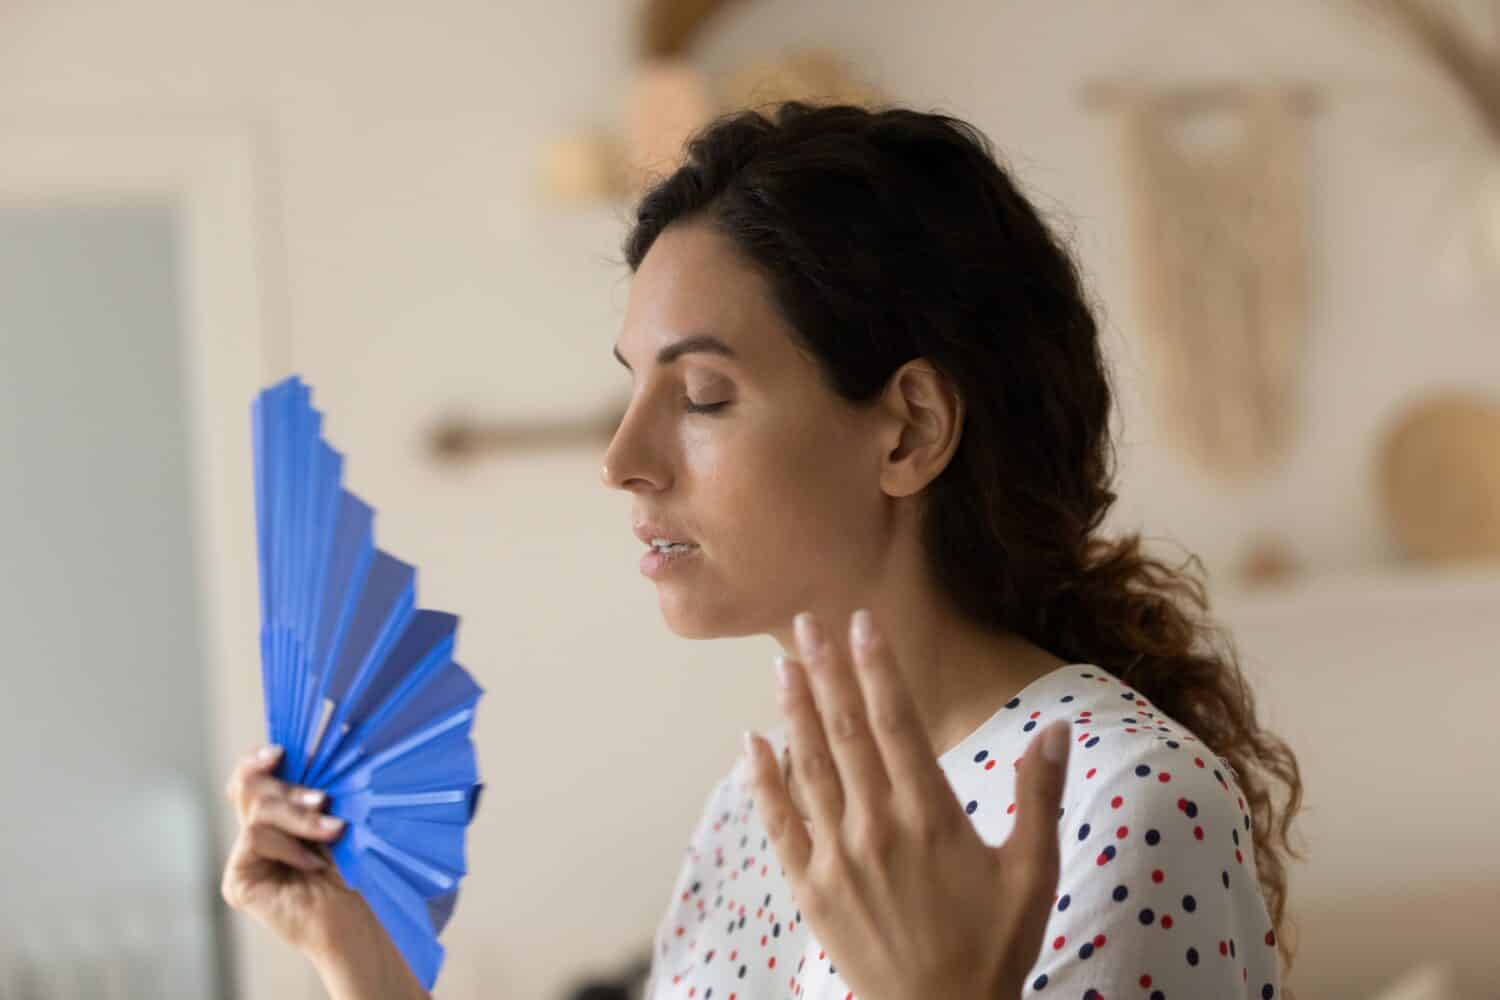 Exhausted overheated sweaty woman suffering from heat at home without conditioner, trying to cool too hot air with handheld fan in summer day, feeling unwell du to weather, humidity, air temperature